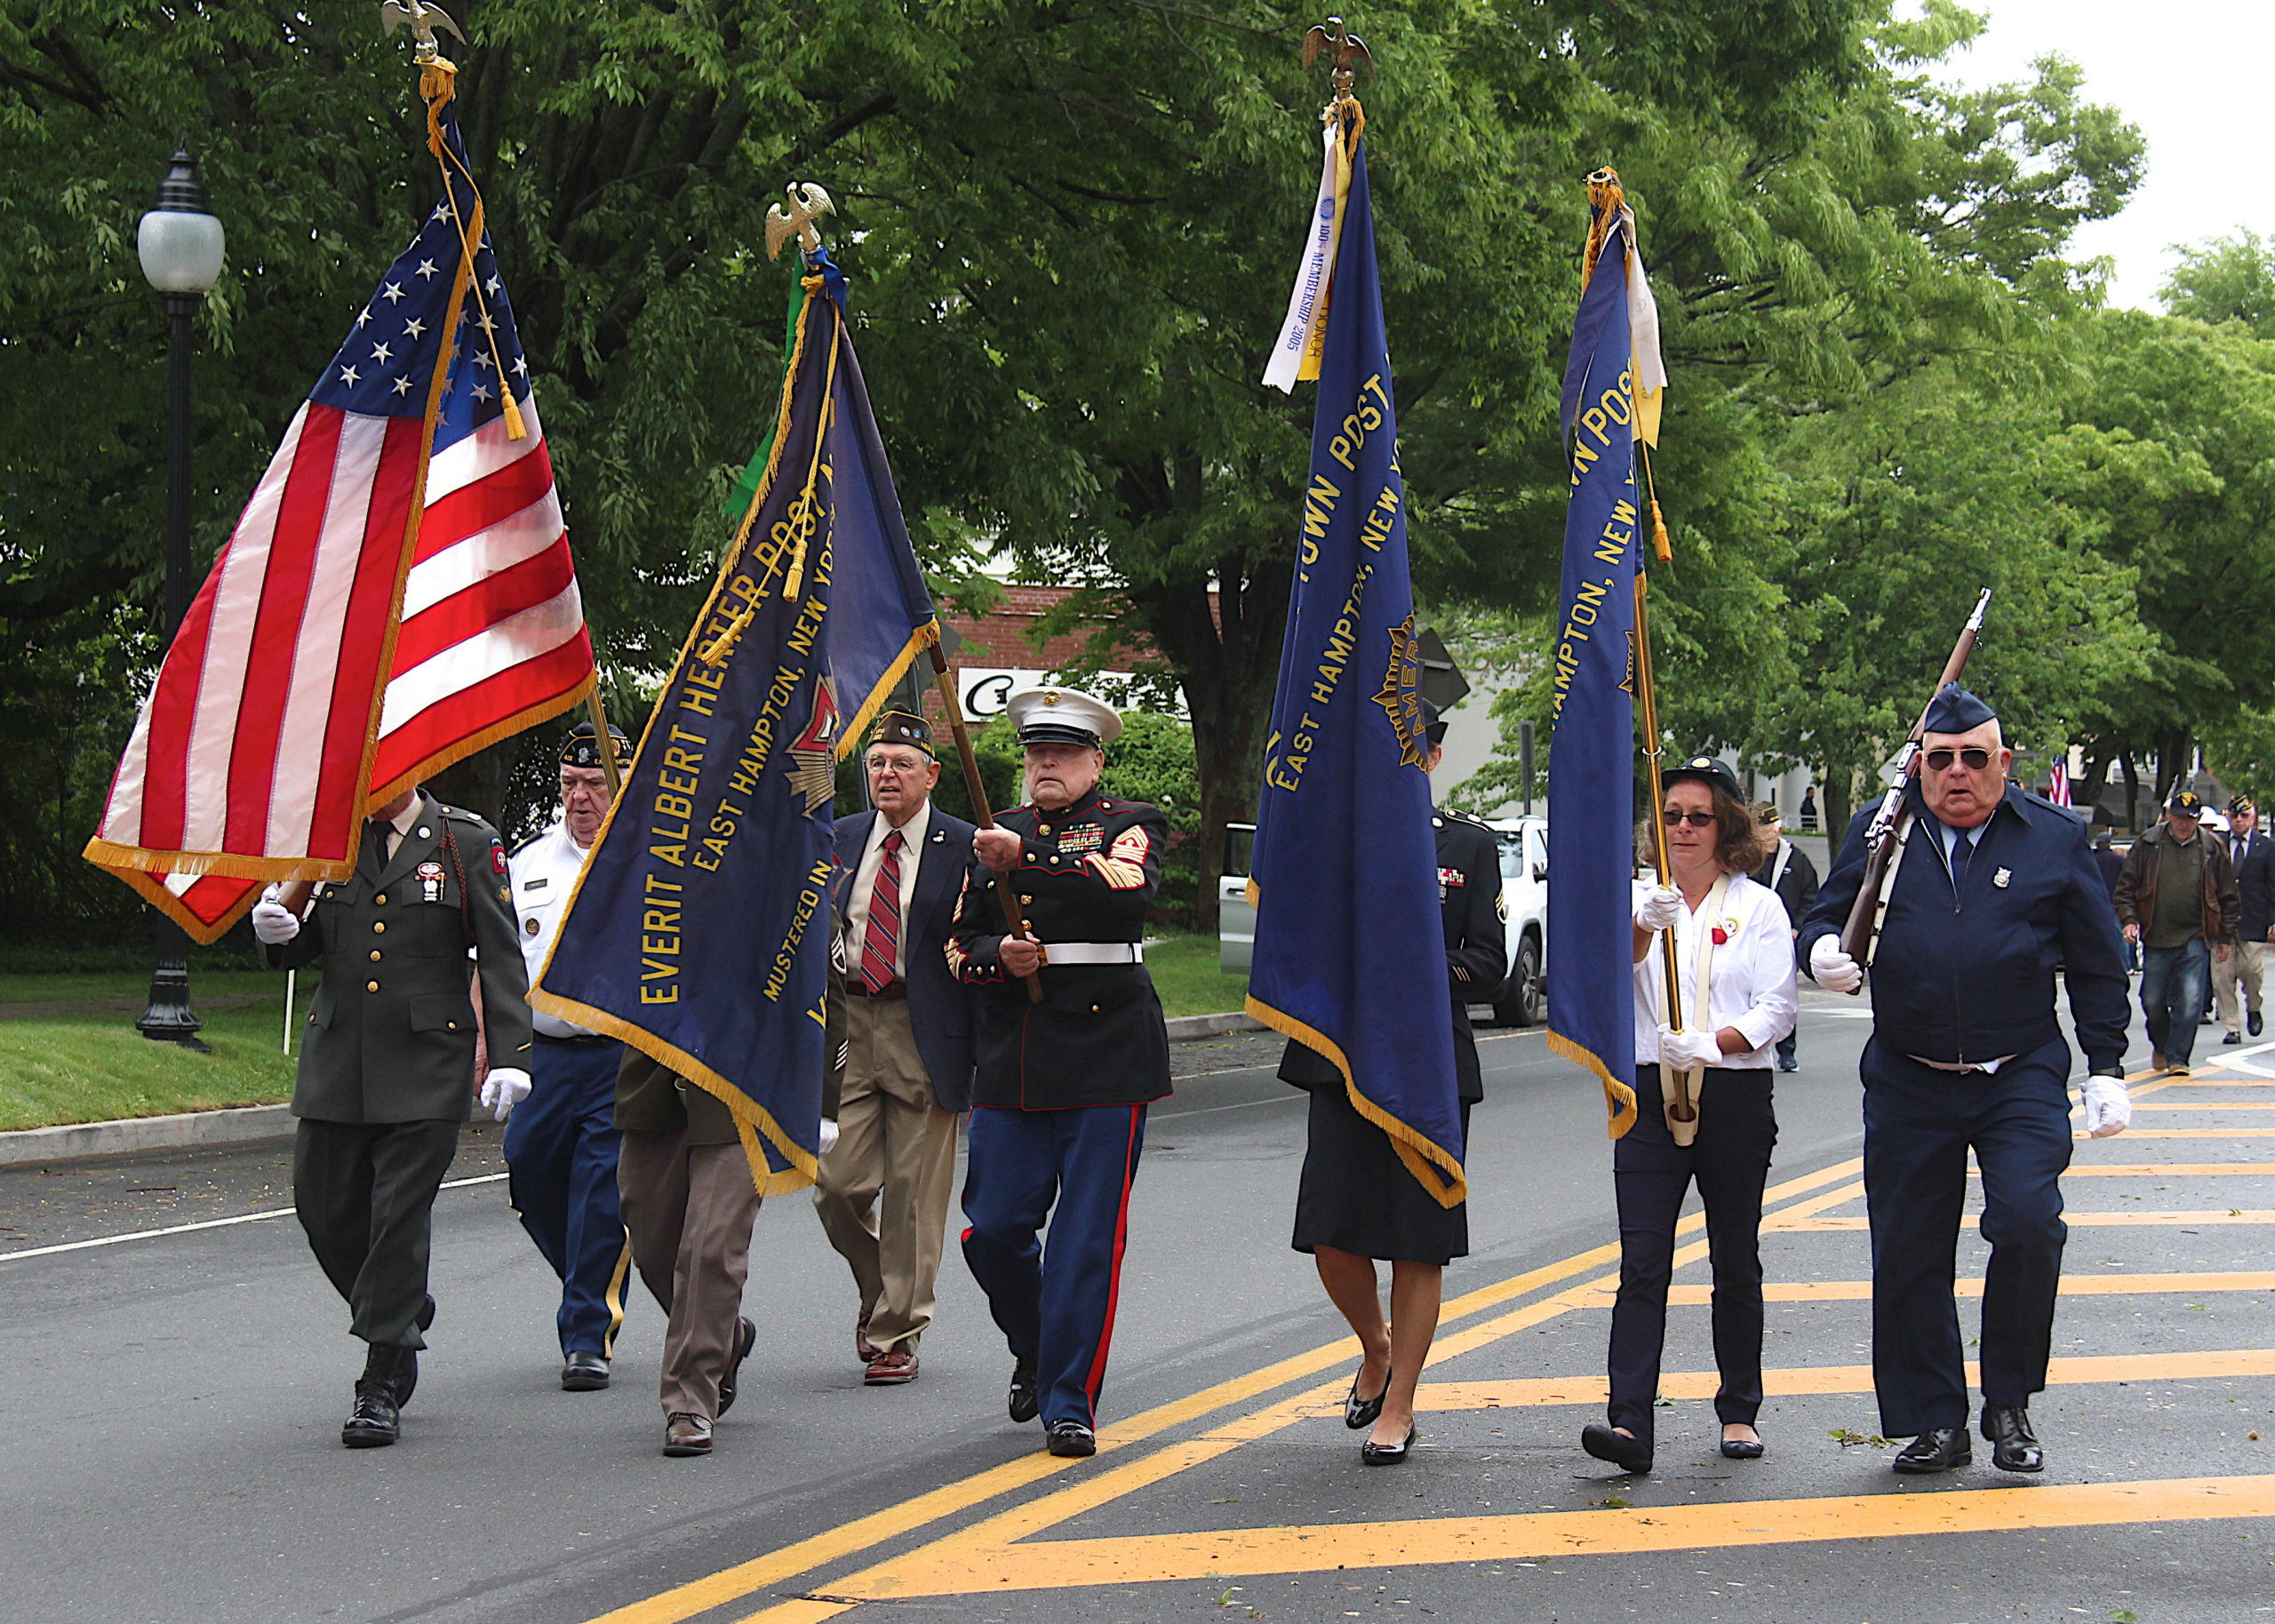 Veterans march down Main Street to Hook Mill where  Memorial Day services were held. There were speeches by VFW commander Bill Mott and American Legion commander Charles Cavalieri.  KYRIL BROMLEY